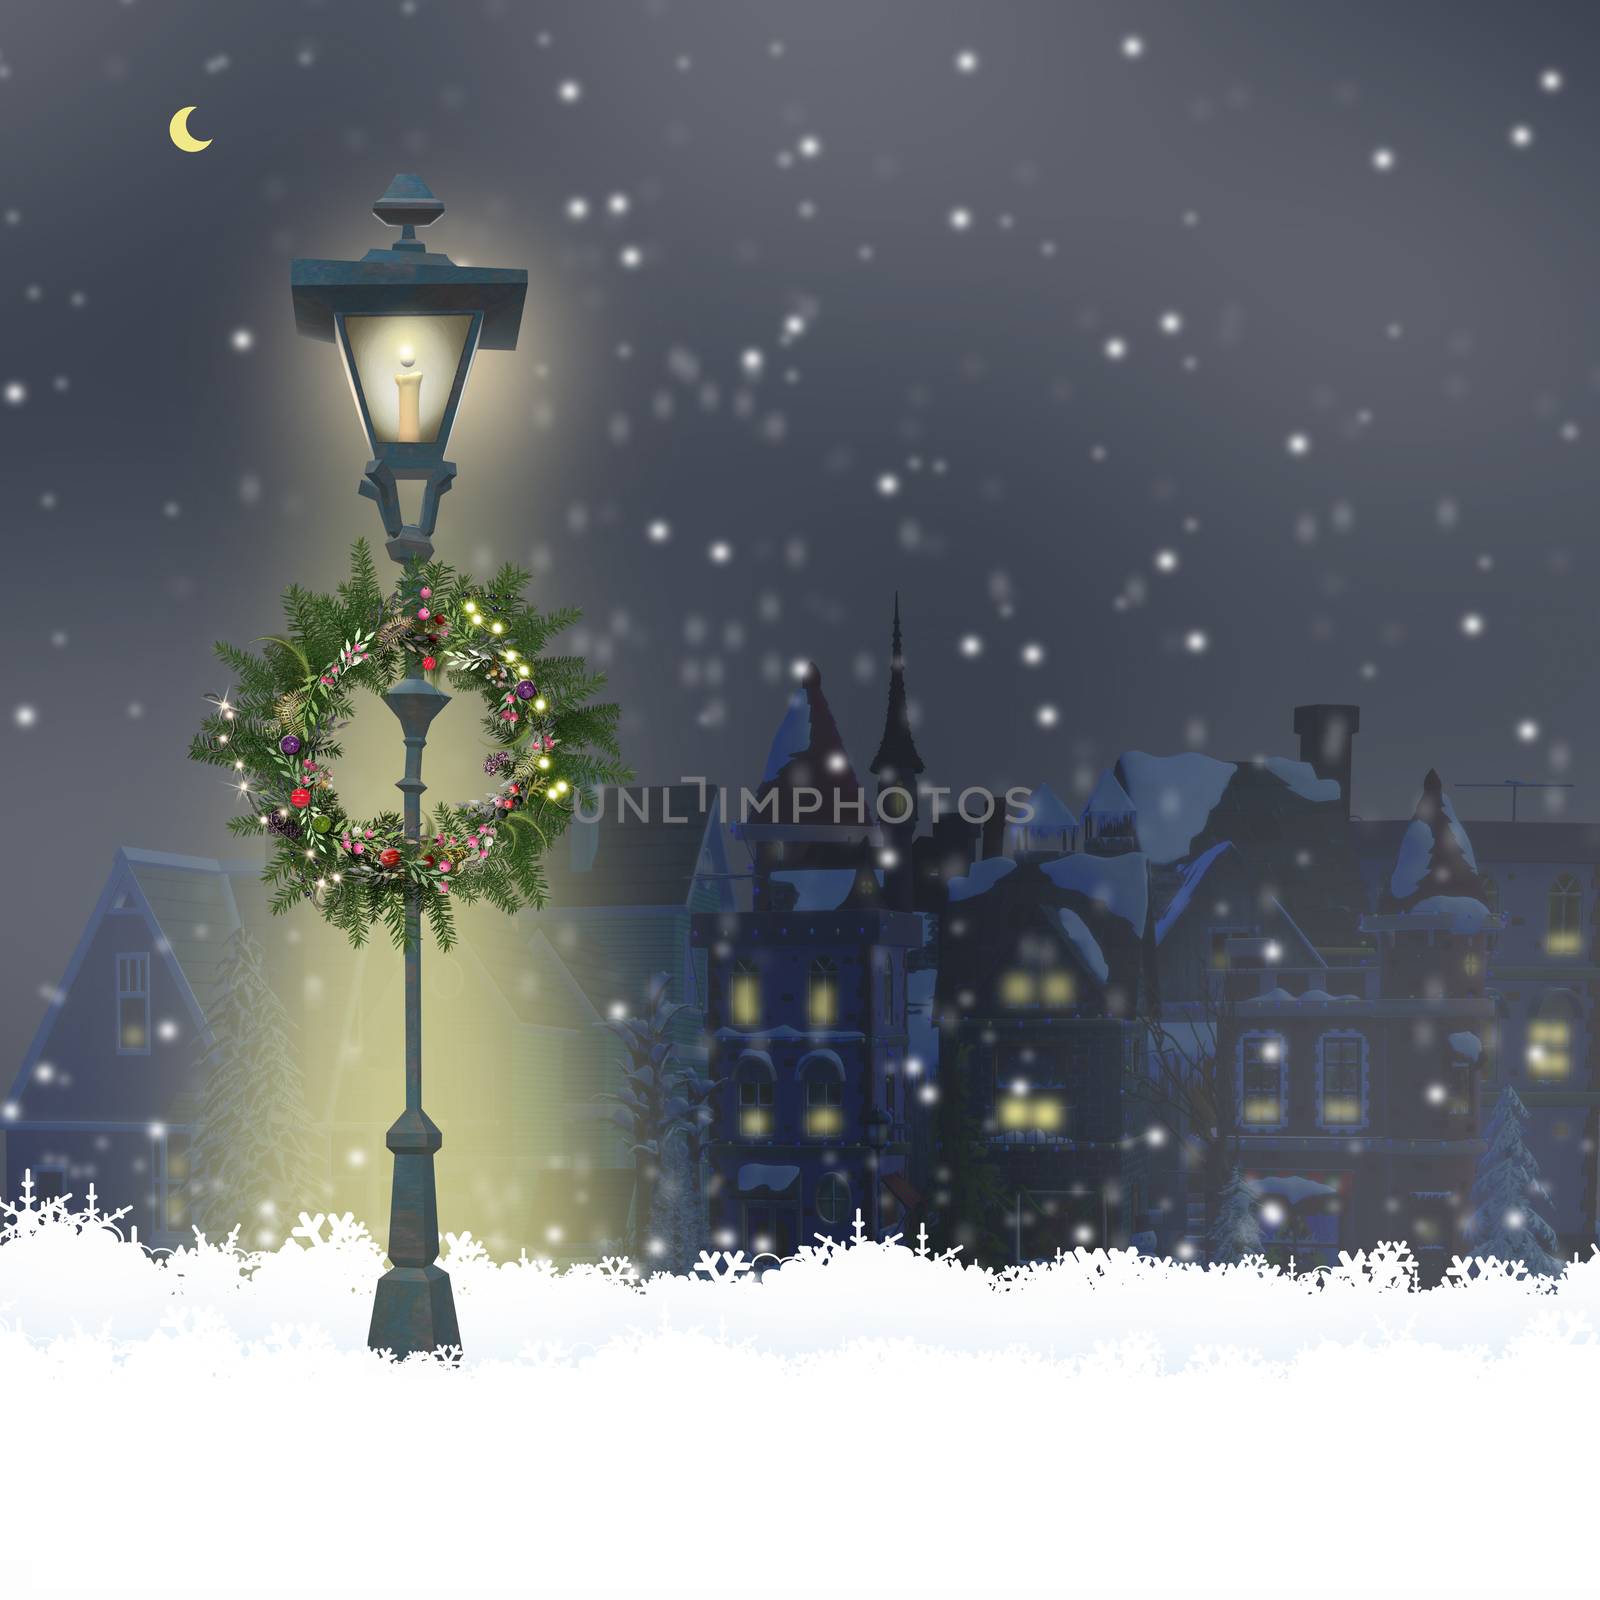 Christmas magic night with old cityscape, snow, street lights, floral wreath in 3D illustration, design for Christmas New Year card.